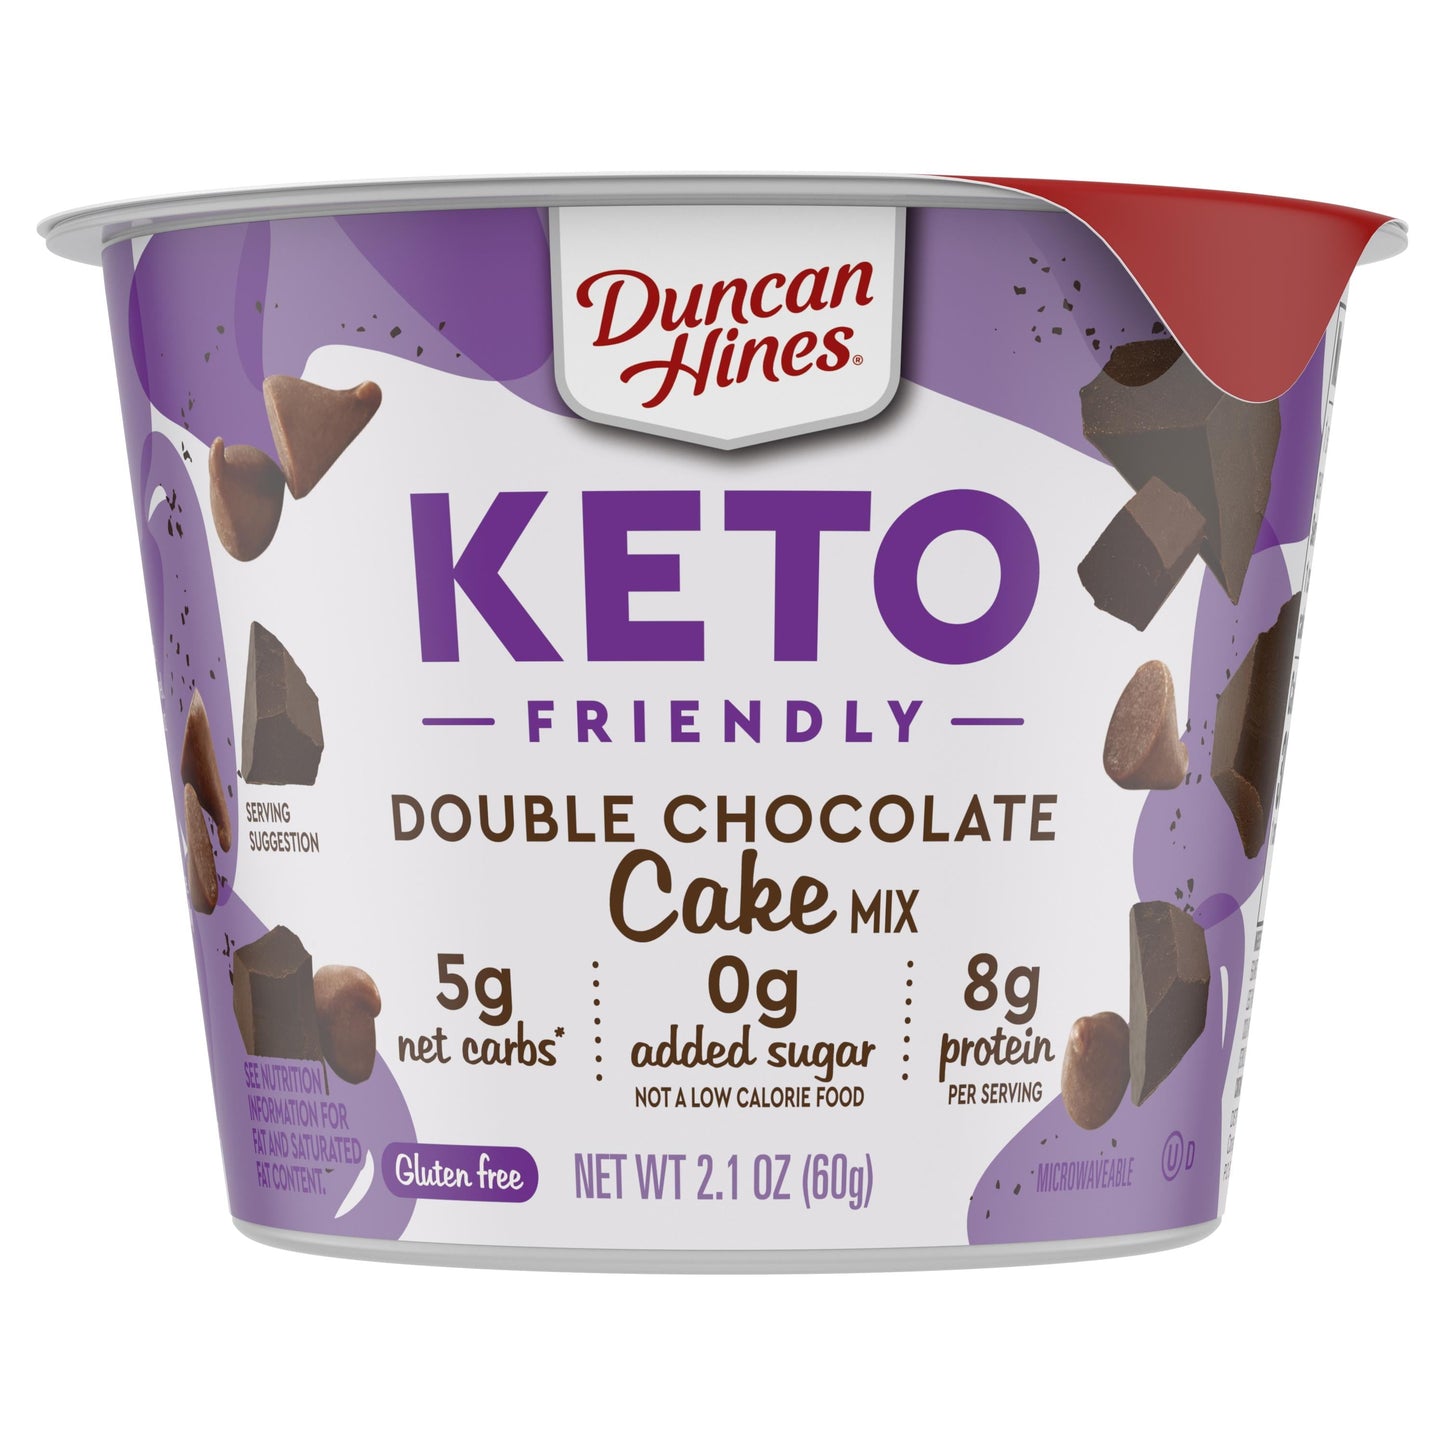 Duncan Hines Keto Friendly Cake Cup Double Chocolate Cake Mix, 2.1 oz